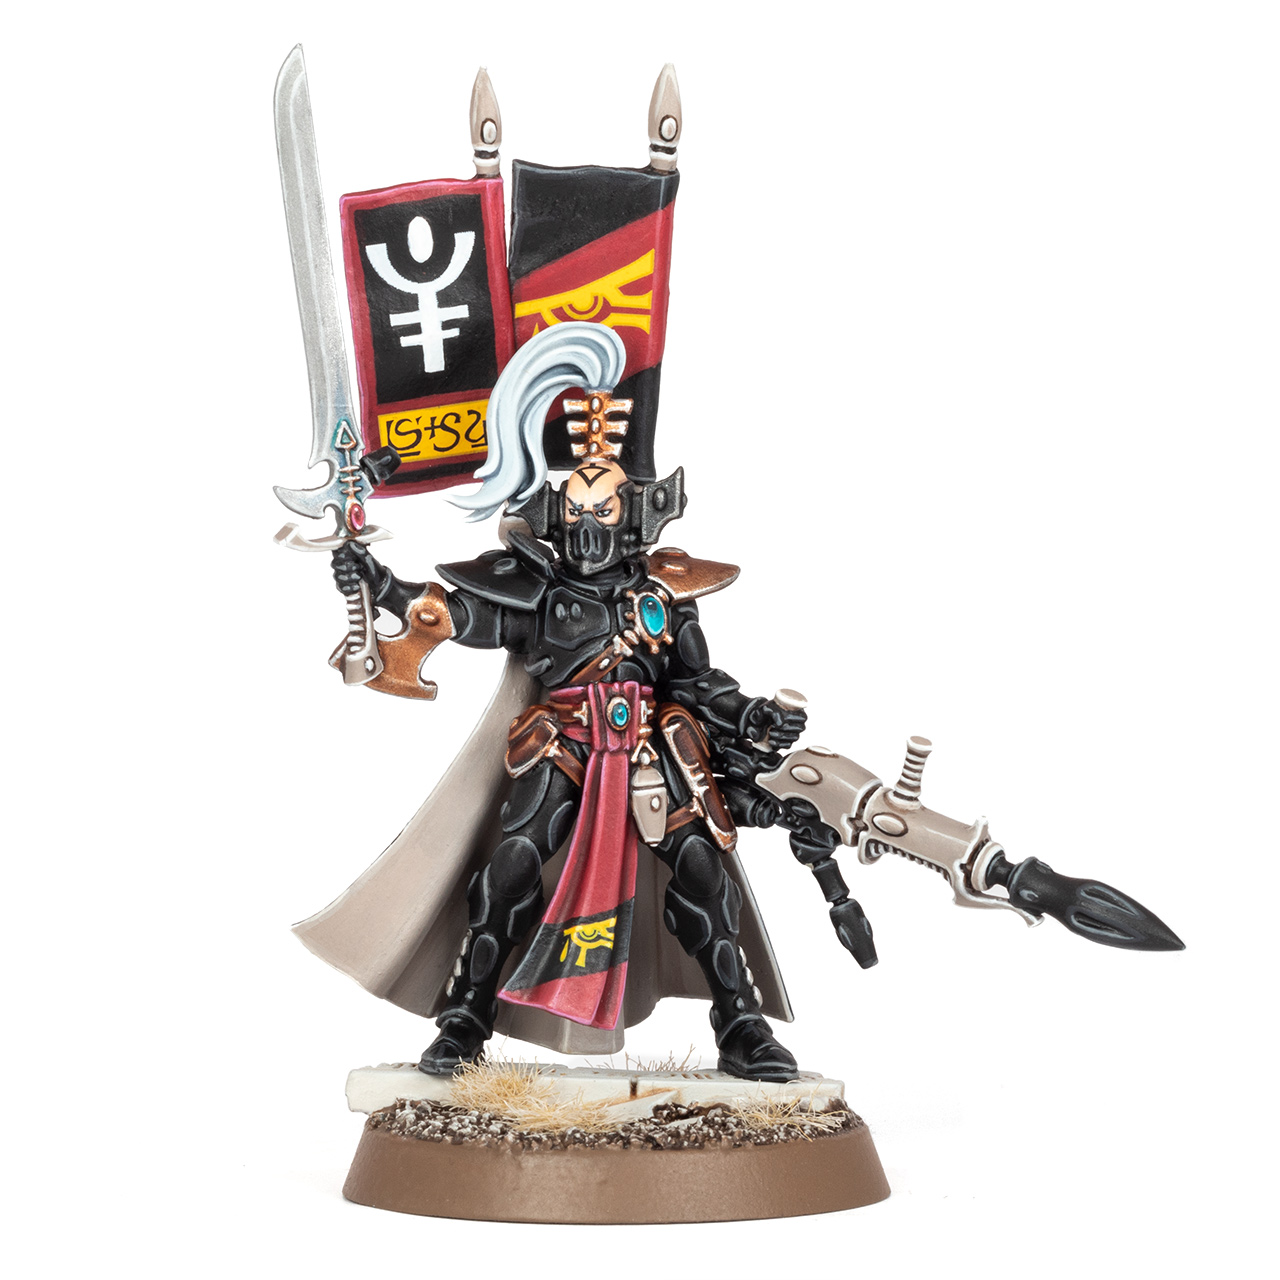 Autarch of Ulthwé, painted by Stahly with Wolf Bristle Brushes